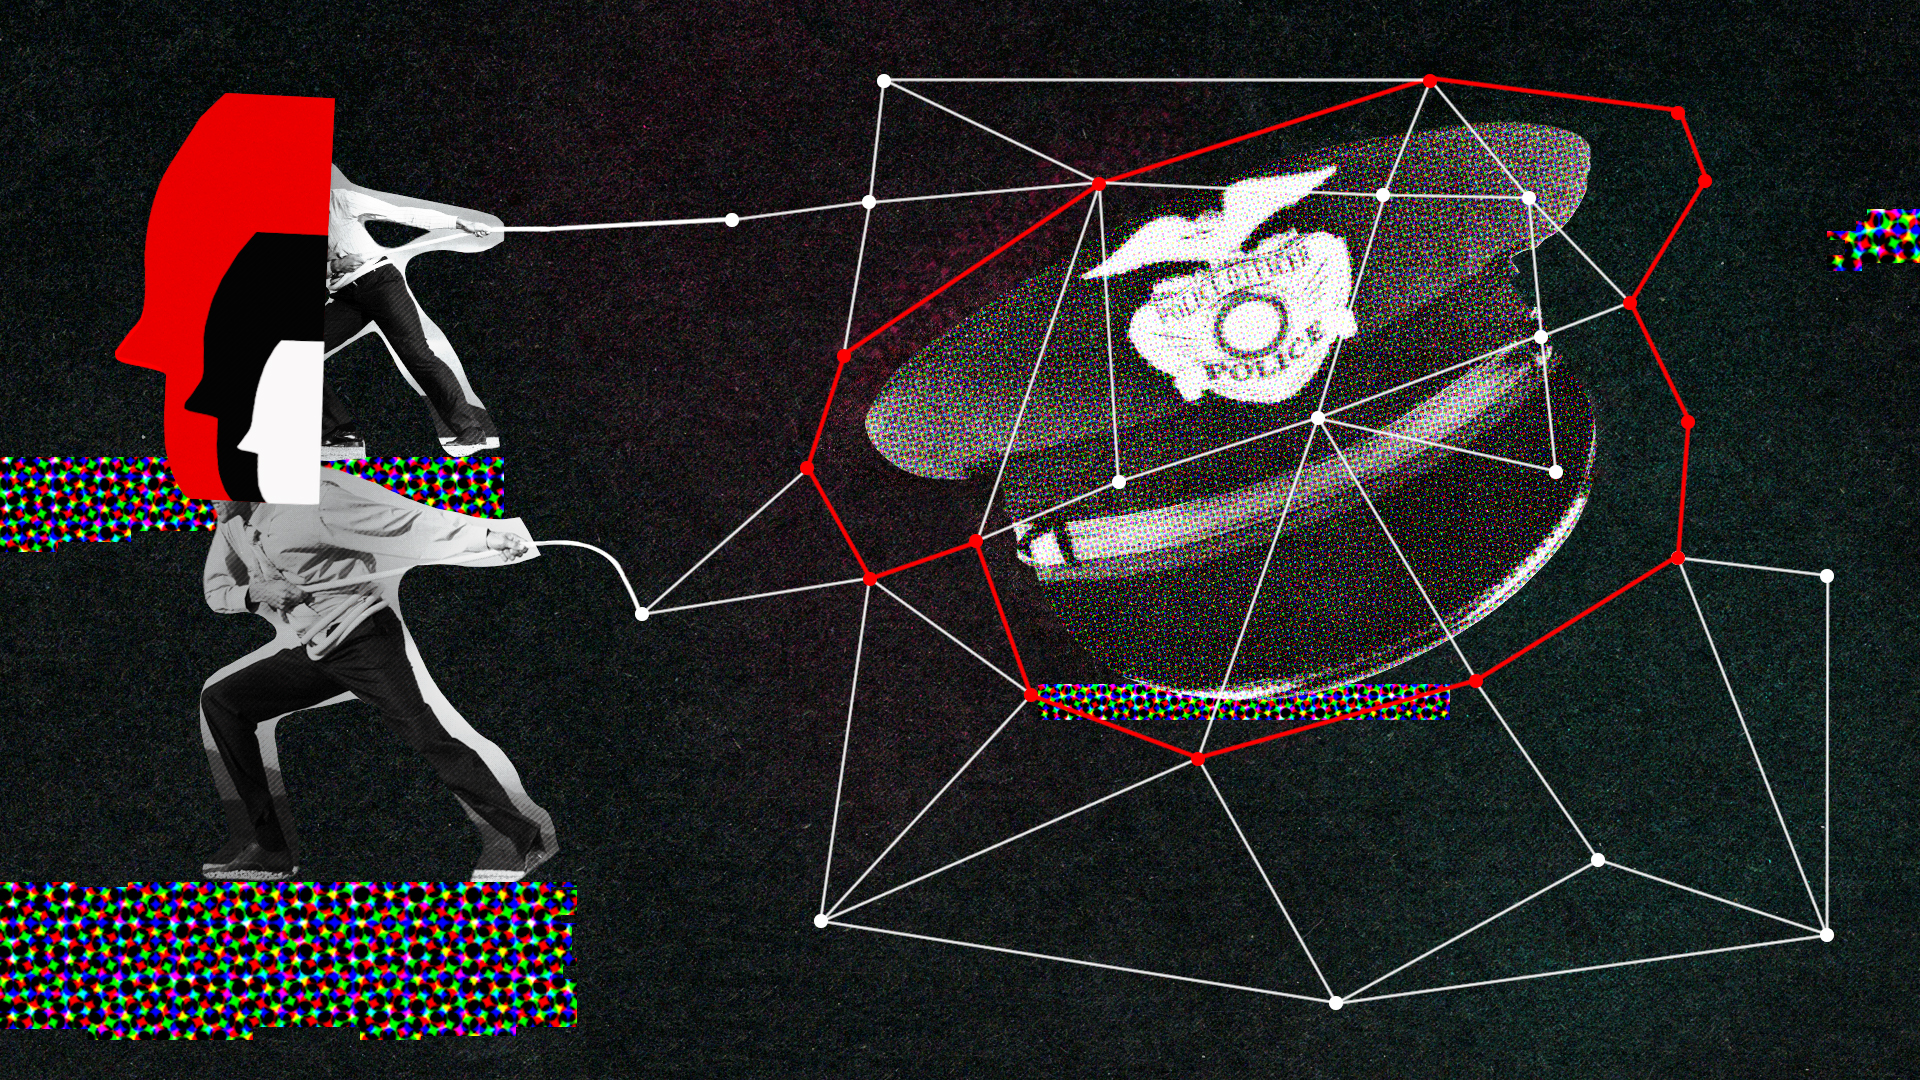 Conceptual illustration showing a police hat with a superimposed nueral network being dismantled.